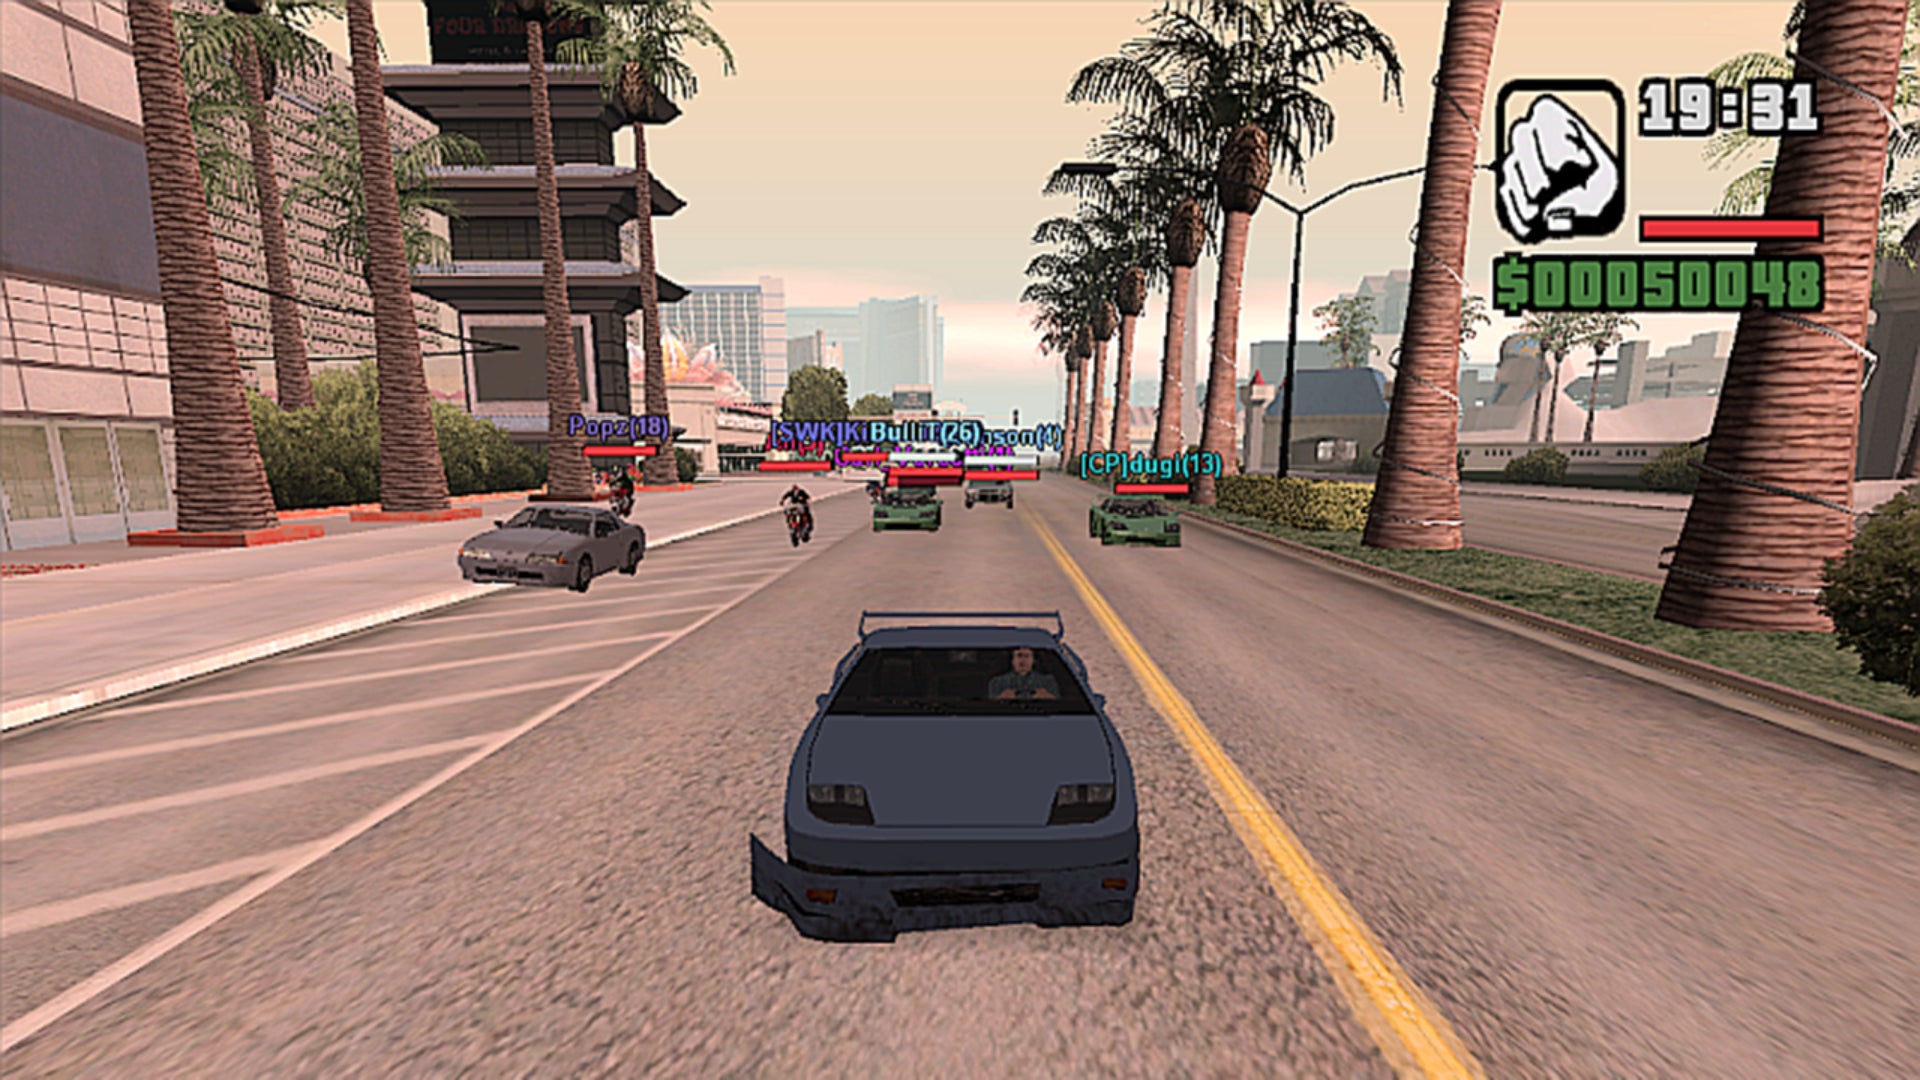 handy Voluntary brand GTA: San Andreas multiplayer mods continue to thrive in the age of GTA  Online – but why? | VG247